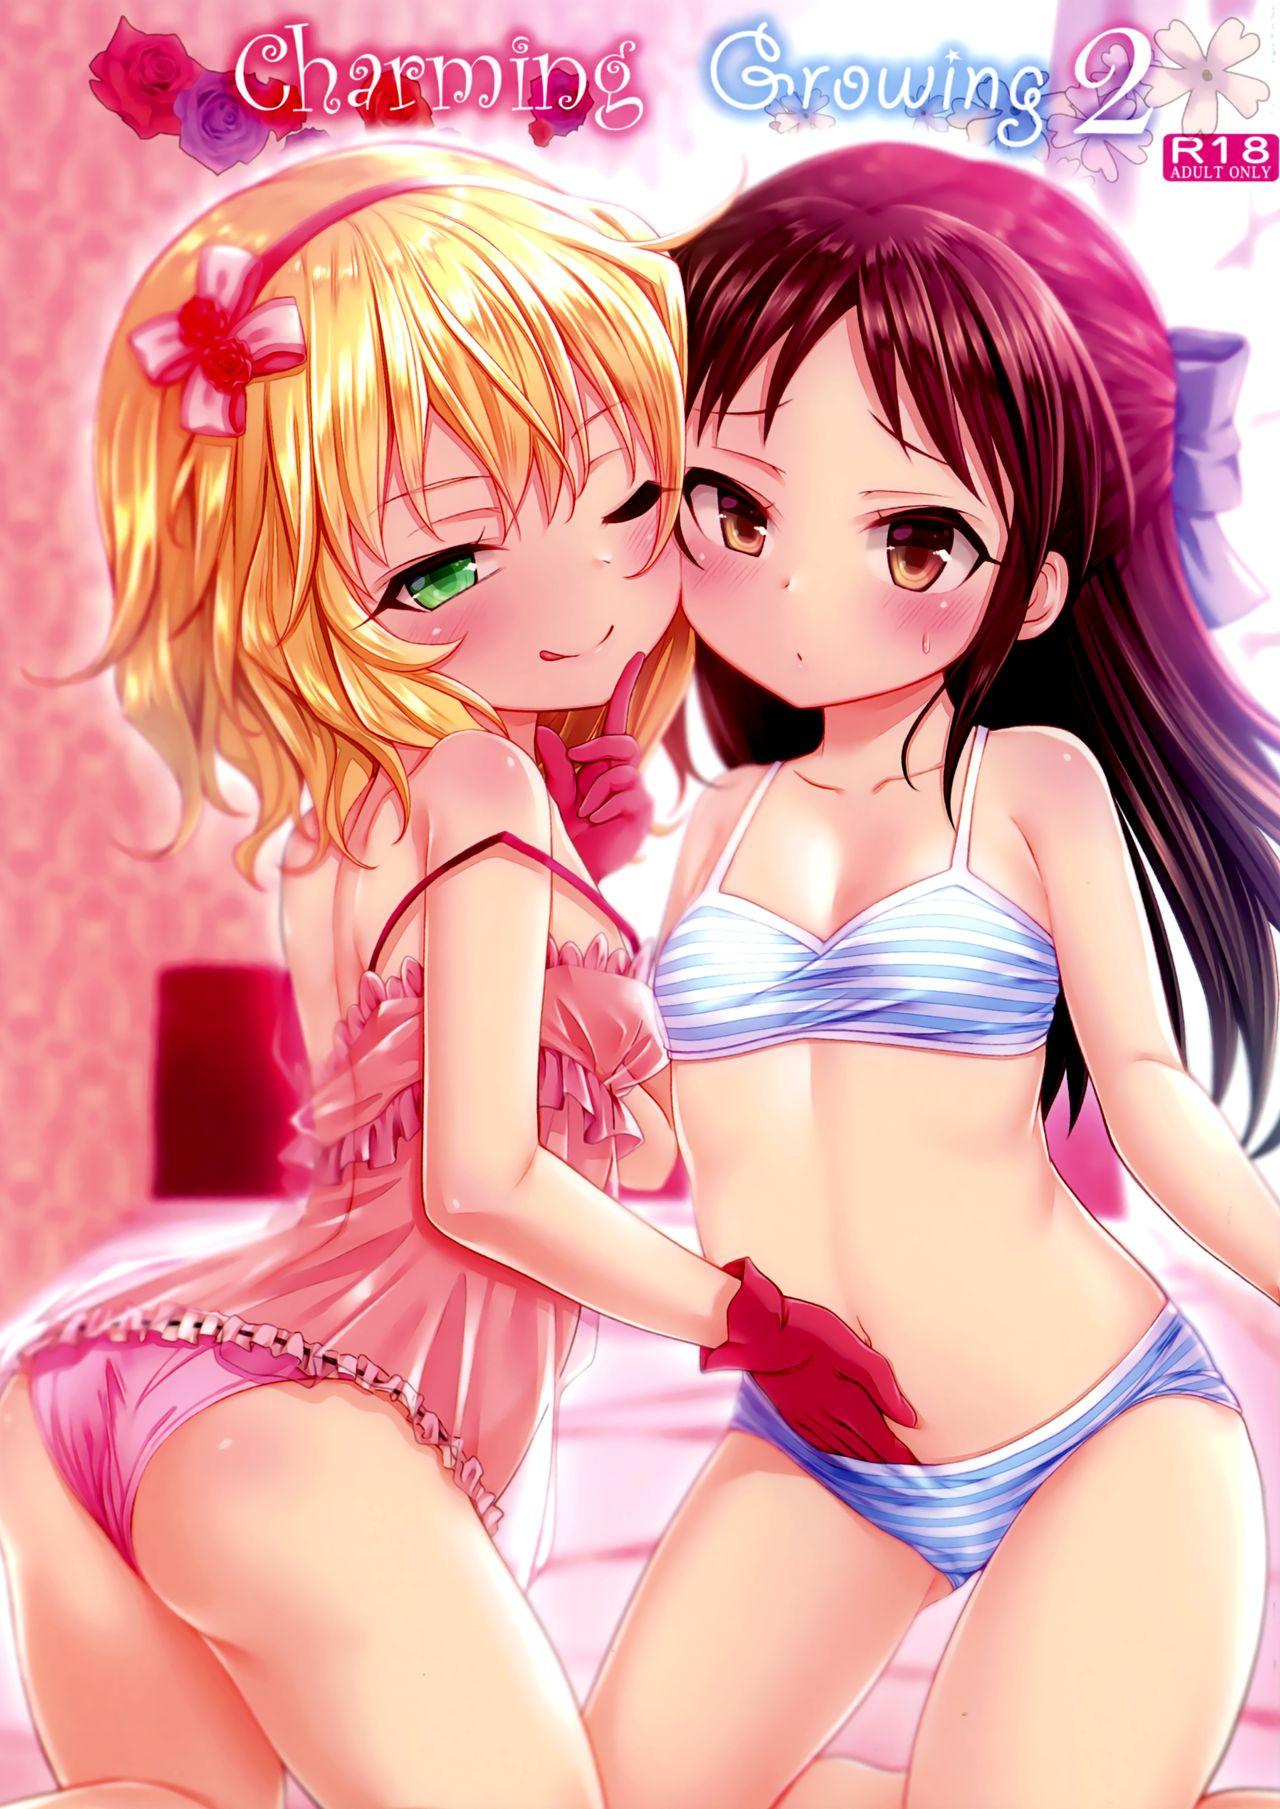 Three Some Charming Growing 2 - The idolmaster Solo Girl - Page 1